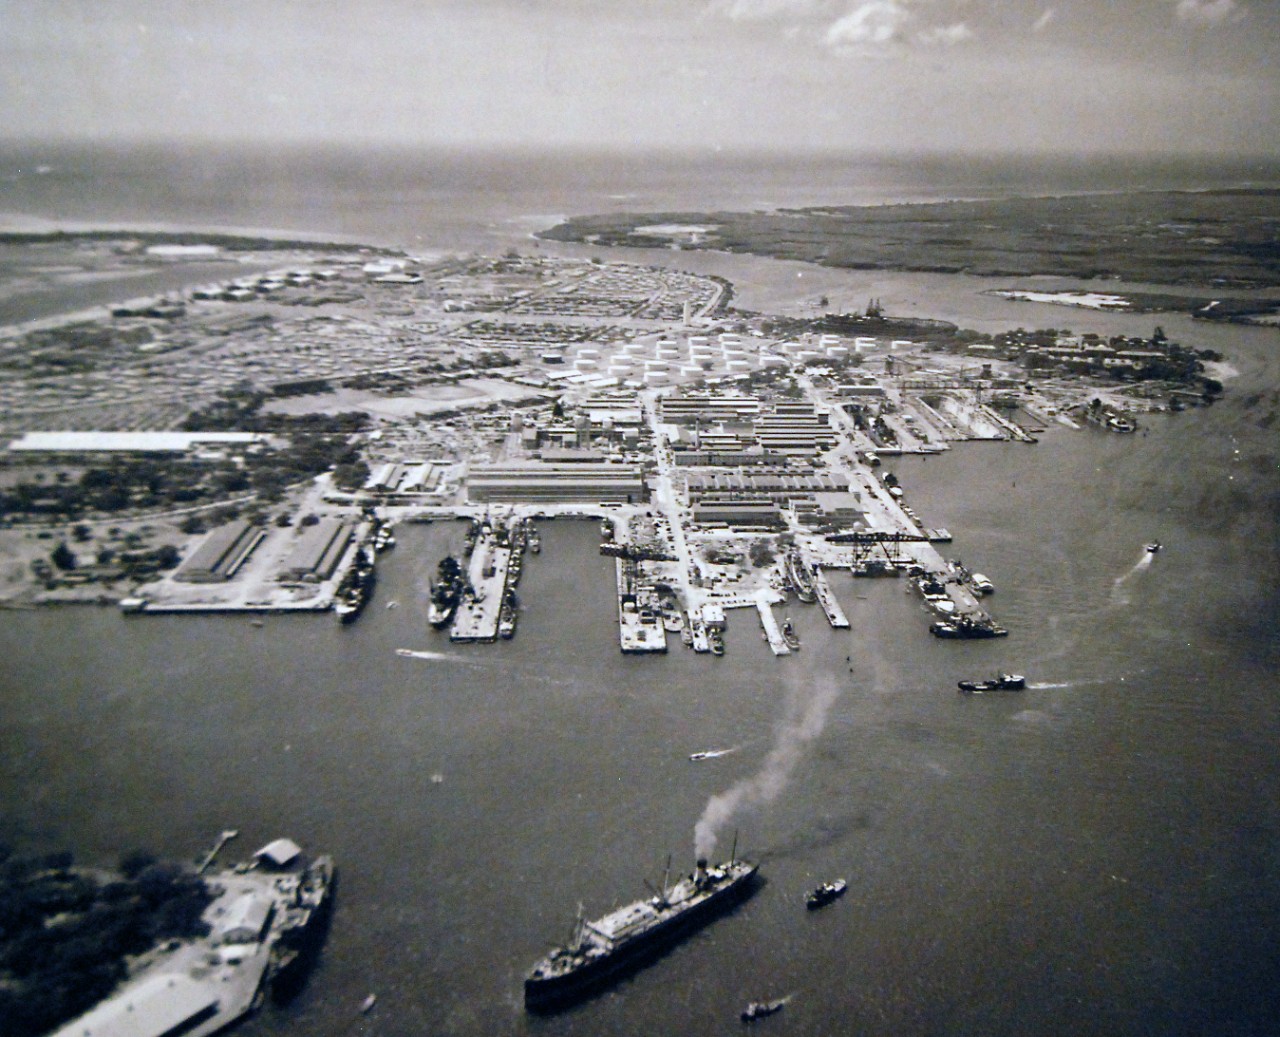 80-G-451123:   Pearl Harbor Navy Yard, Oahu, Territory of Hawaii, aerial view looks south, October 13, 1941.   Official U.S. Navy photograph, now in the collections of the National Archives.  (2016/09/20).